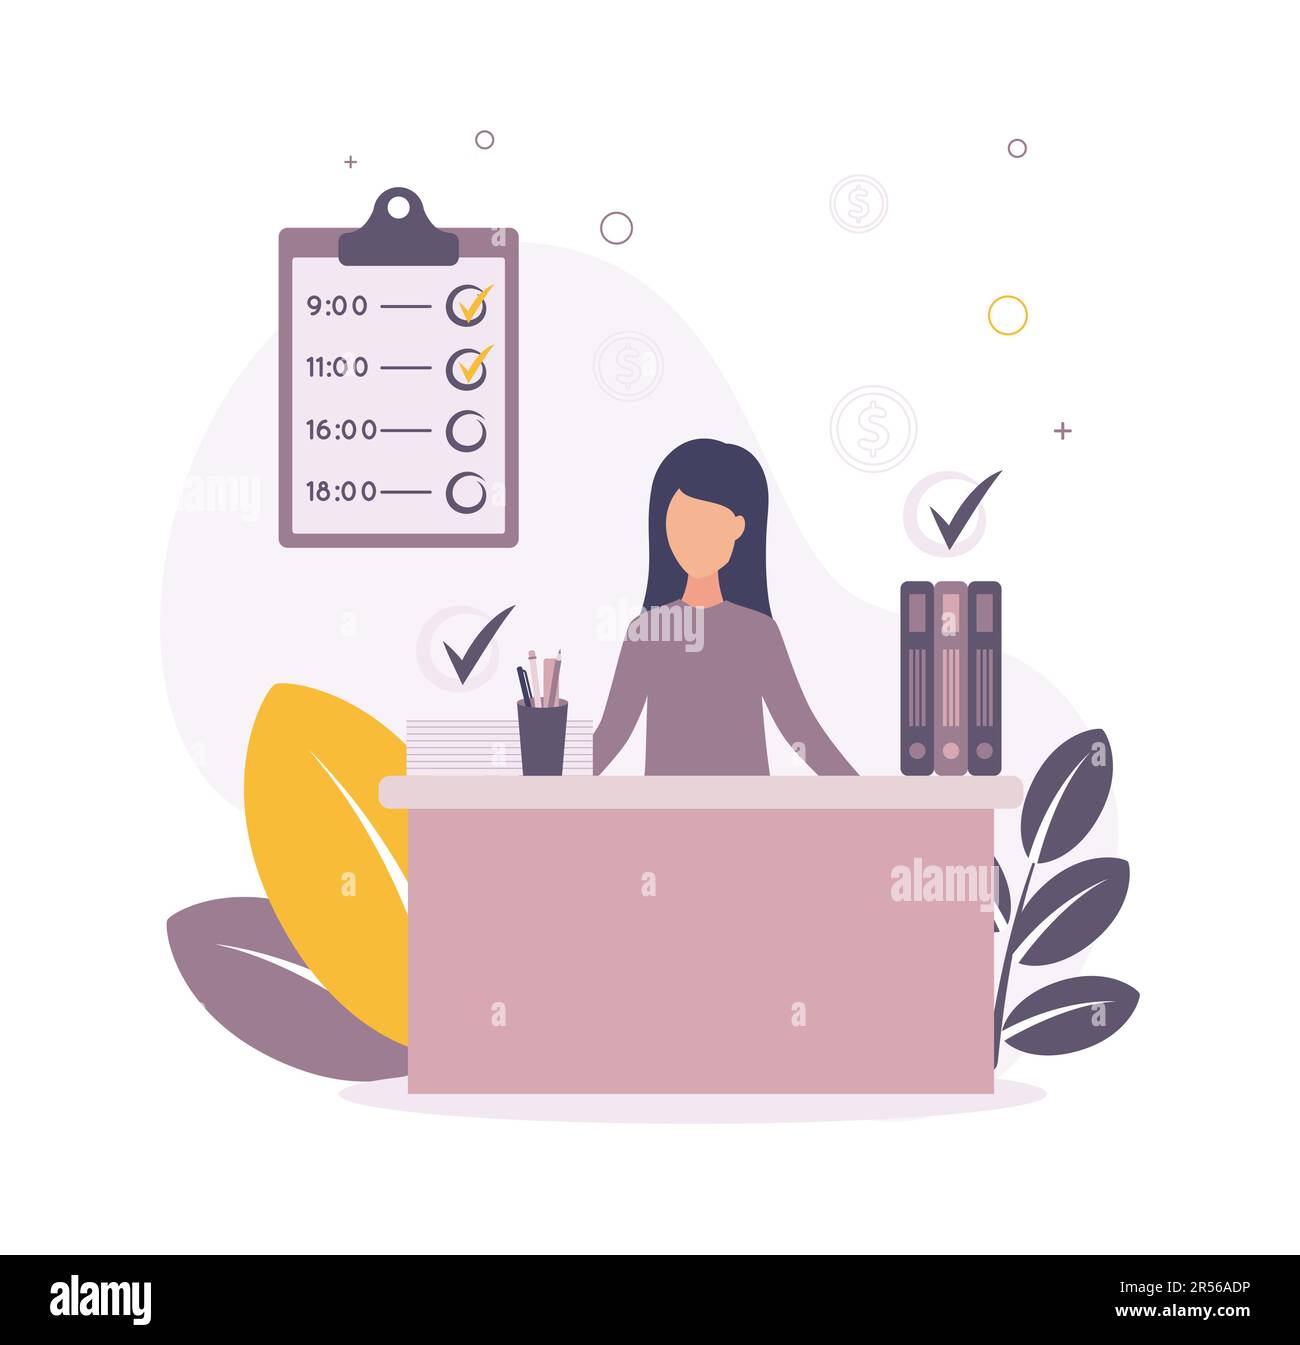 Time management. Illustration of a woman sitting at a table on which papers and folders, above them a check mark about a job, on a background a graph Stock Vector